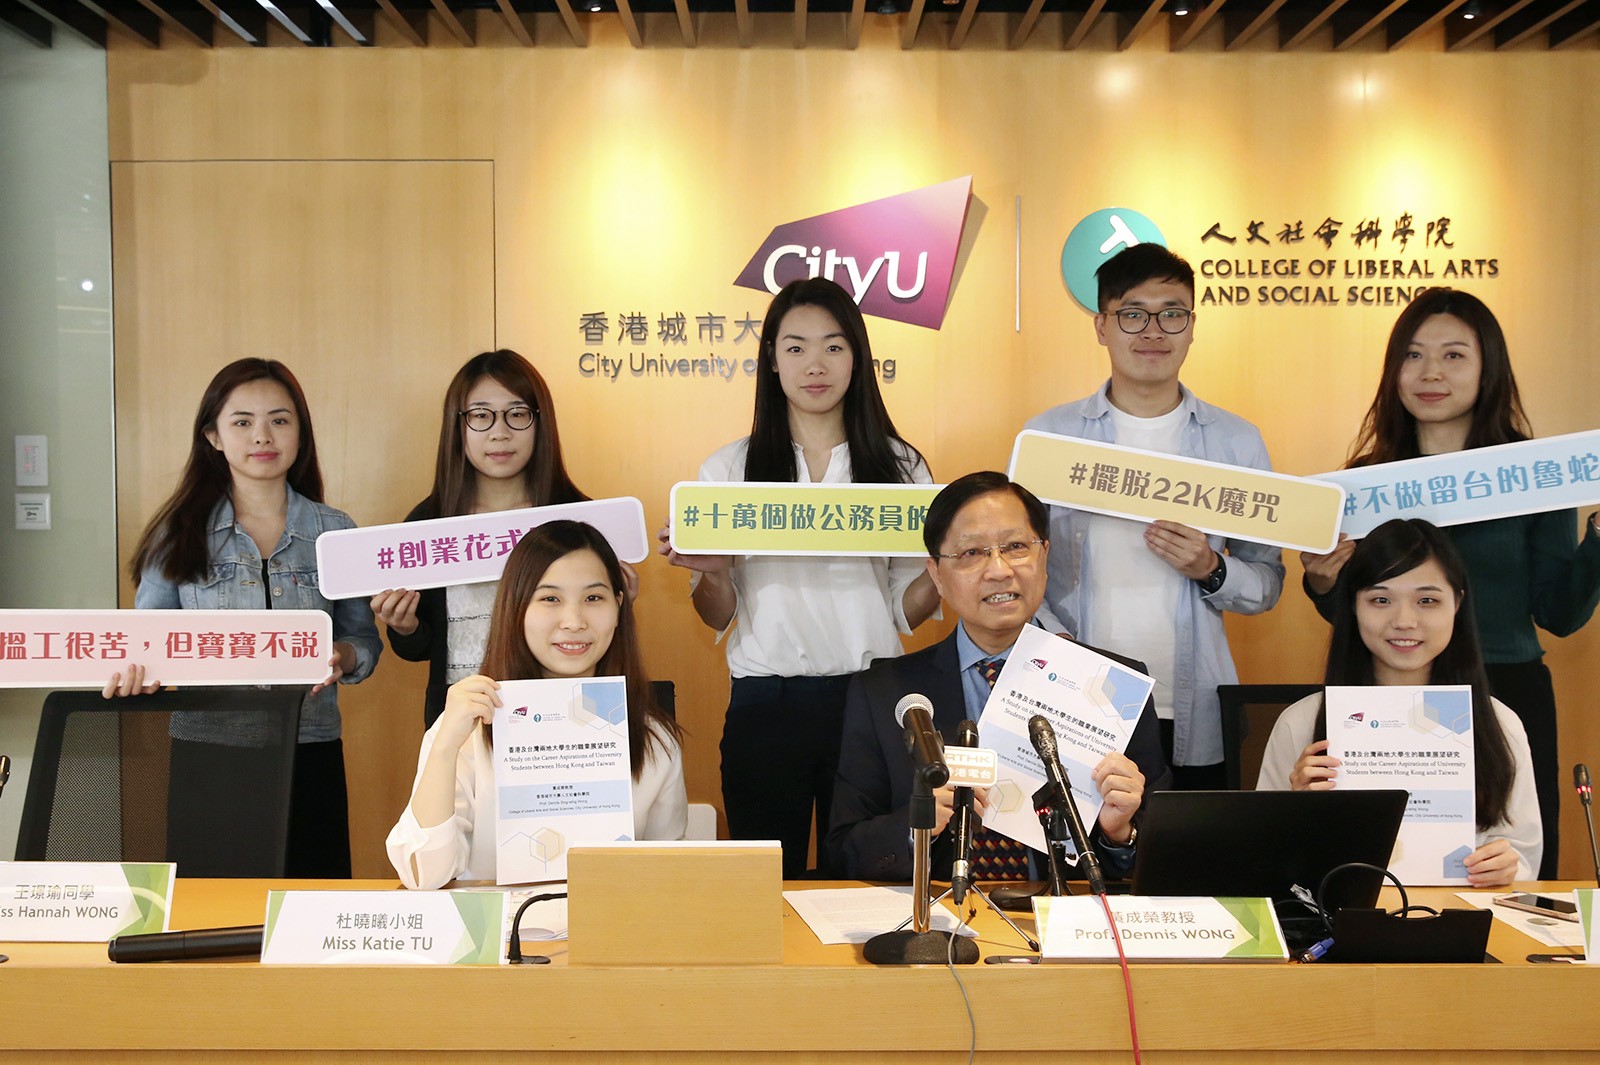 Results of the research project titled “A Study of Career Aspirations between university students in Hong Kong and Taiwan” were published by CityU’s College of Liberal Arts and Social Sciences. 